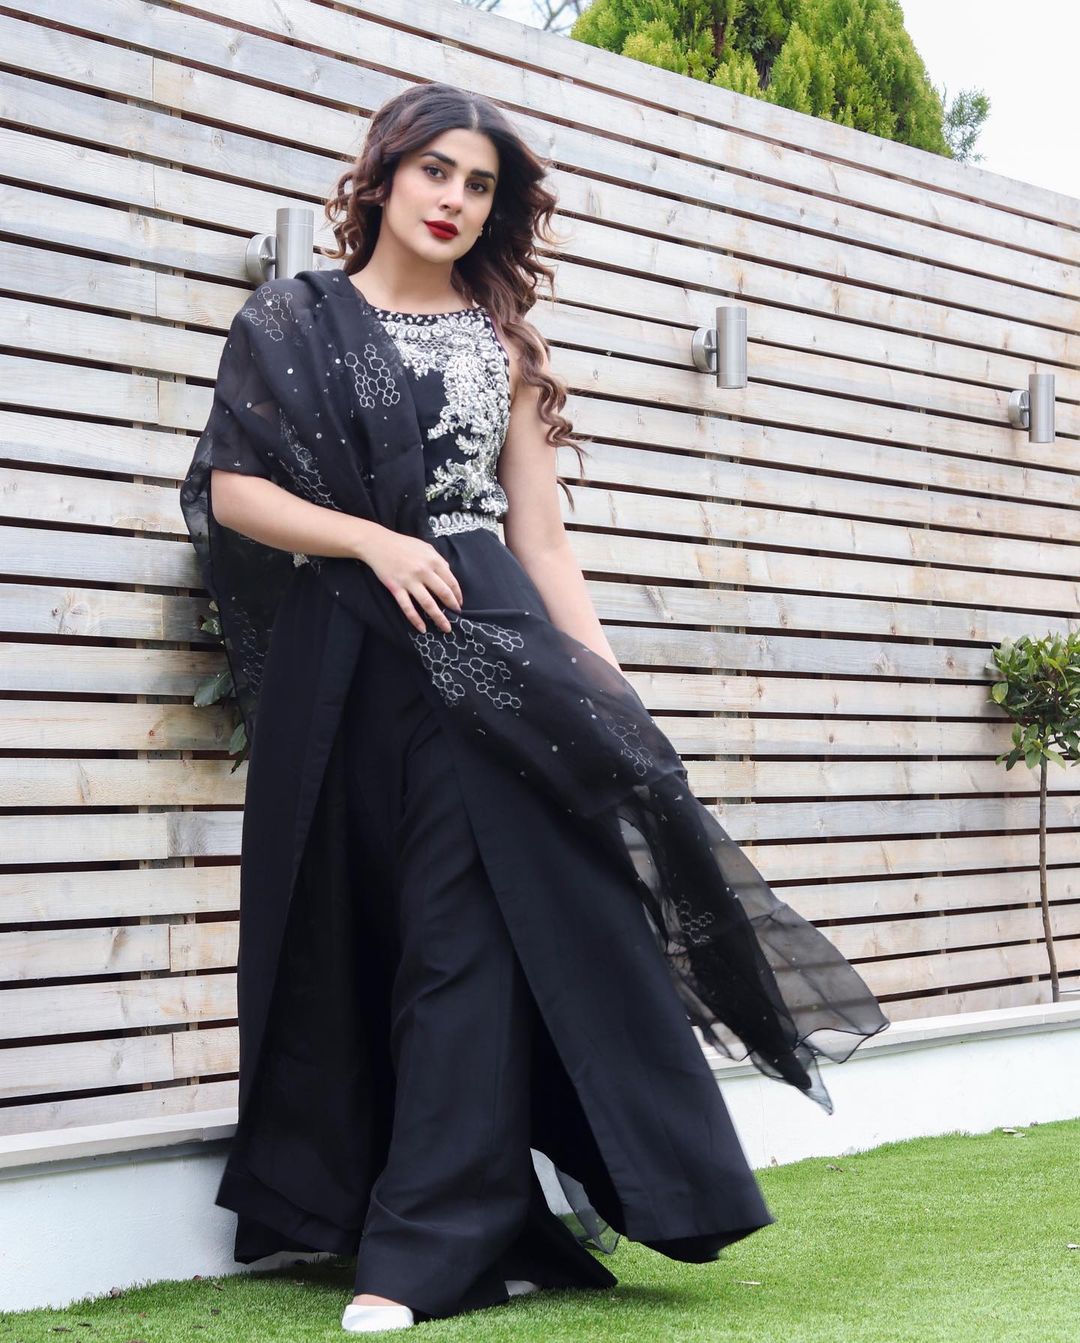 Kubra Khan Brings Her A-Game in Latest Shoot for Clothing Brand - Lens